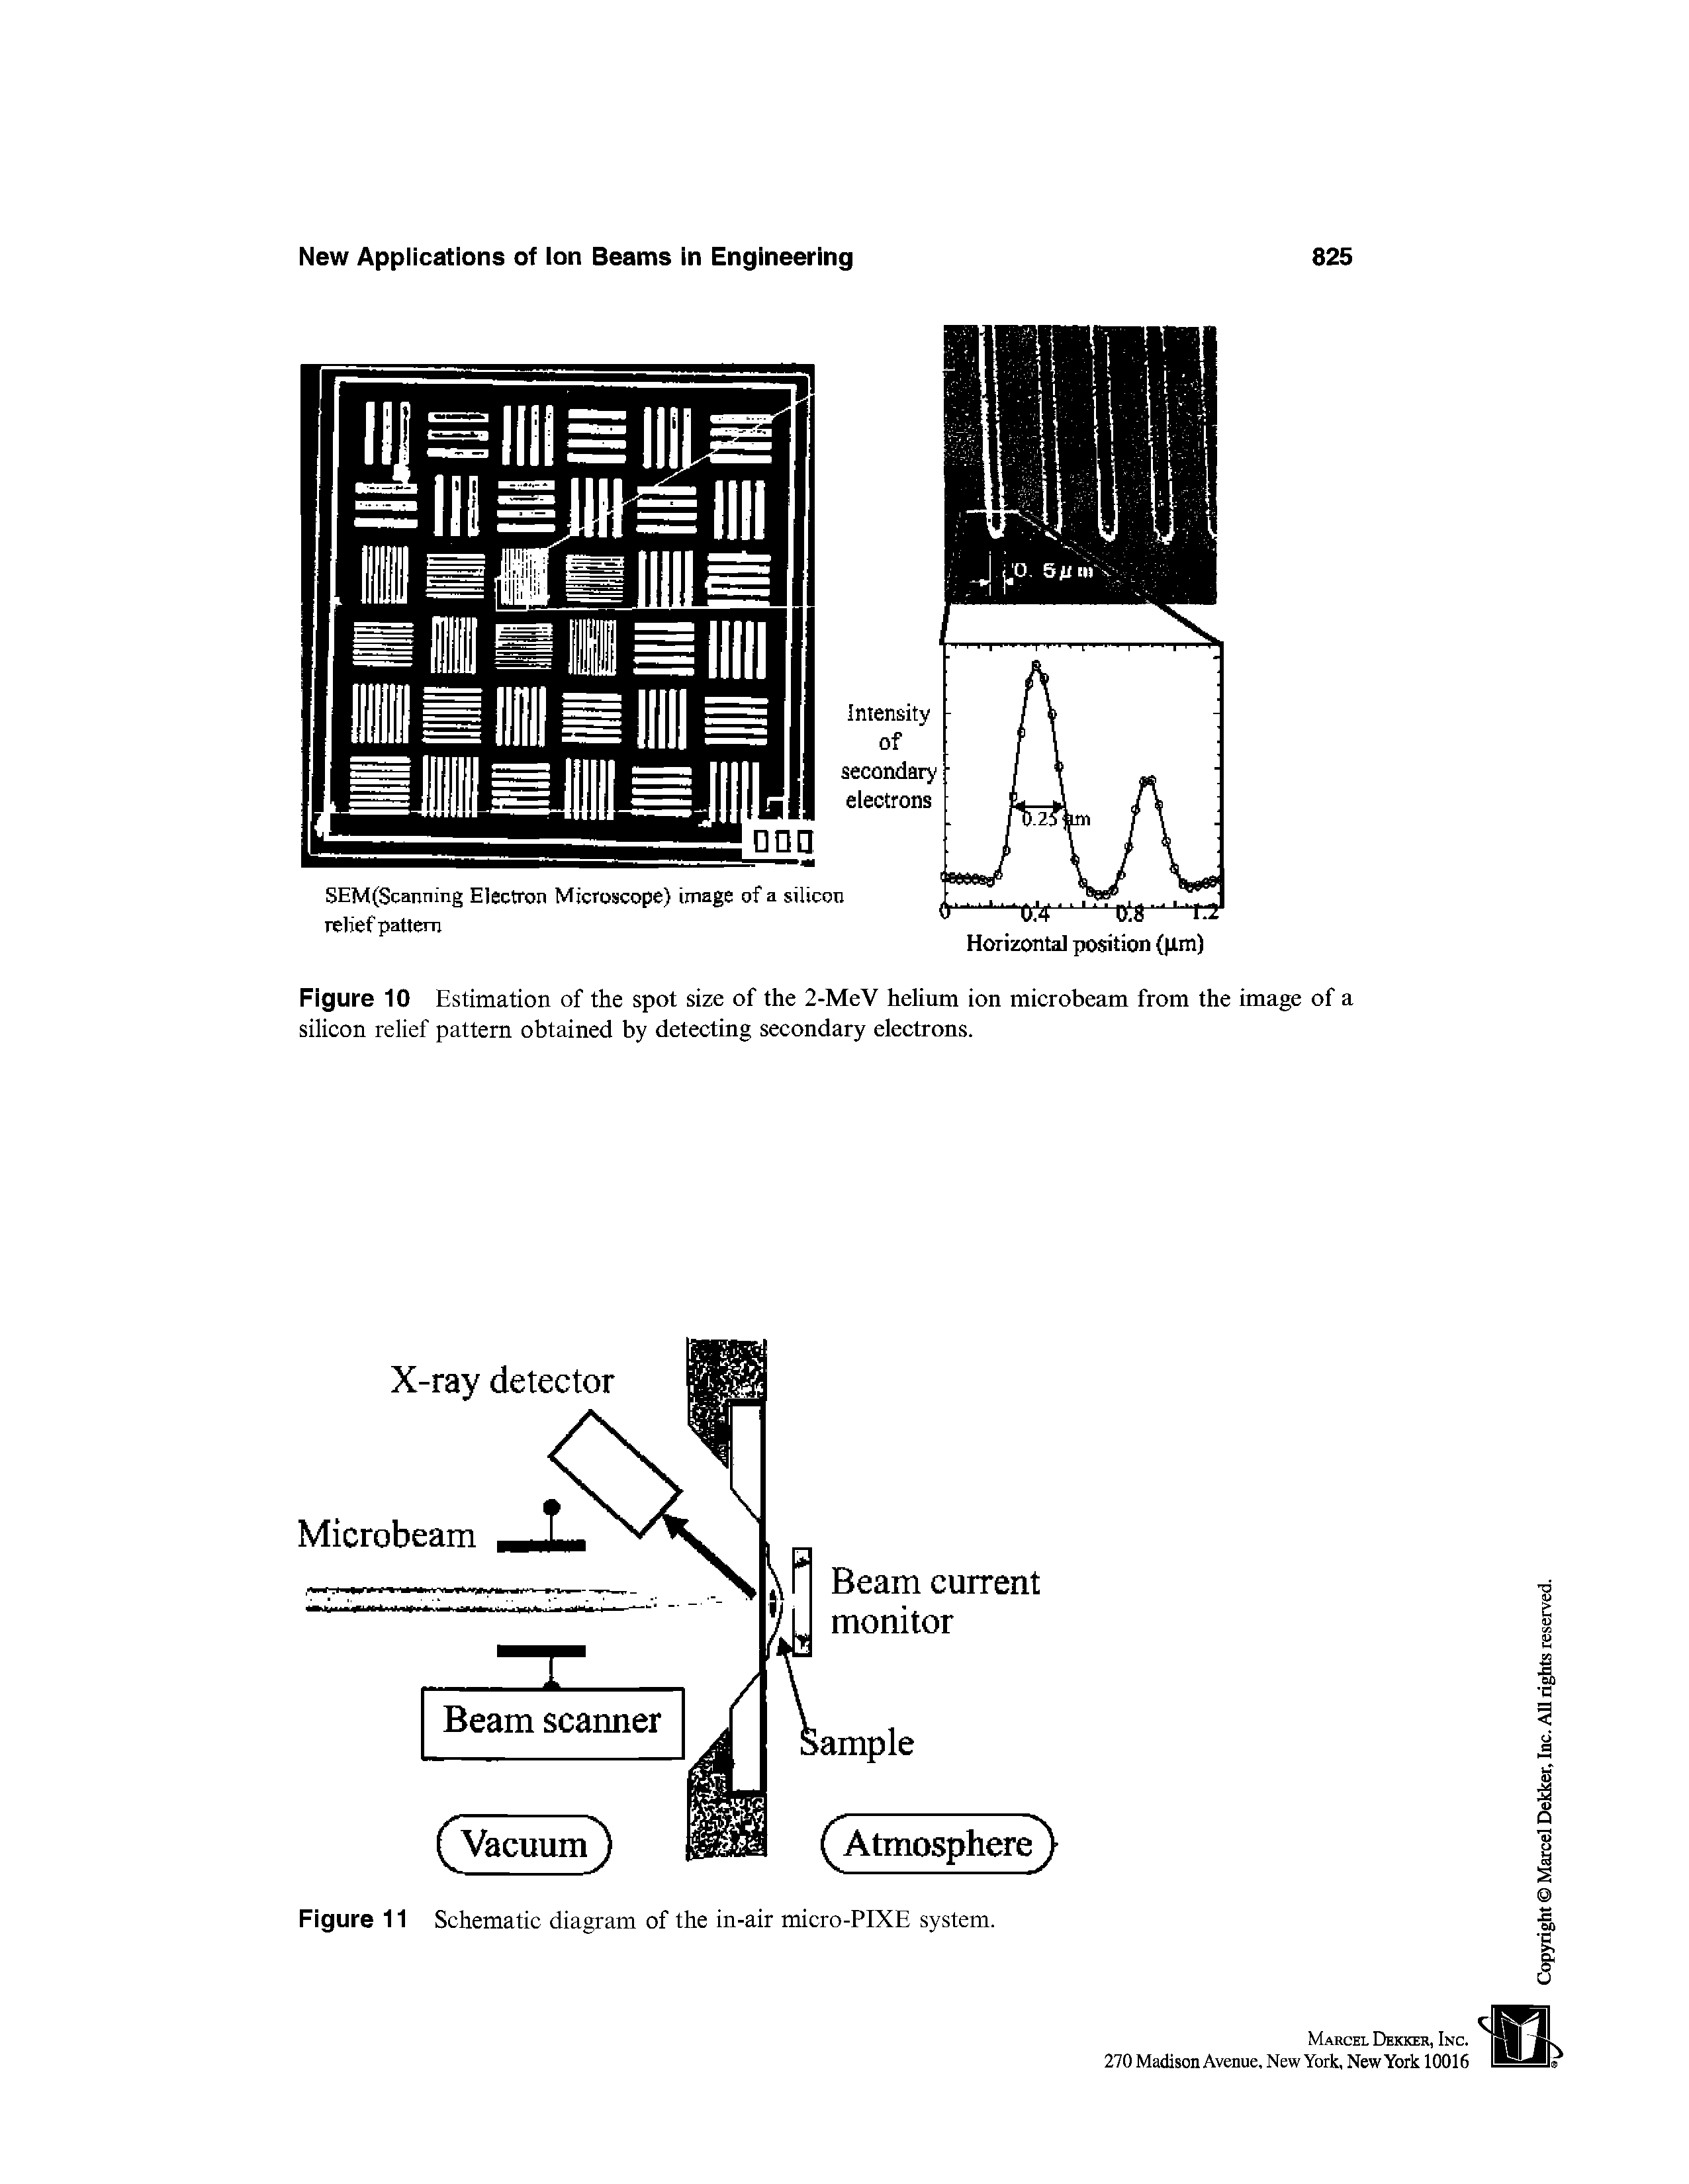 Figure 11 Schematic diagram of the in-air micro-PIXE system.